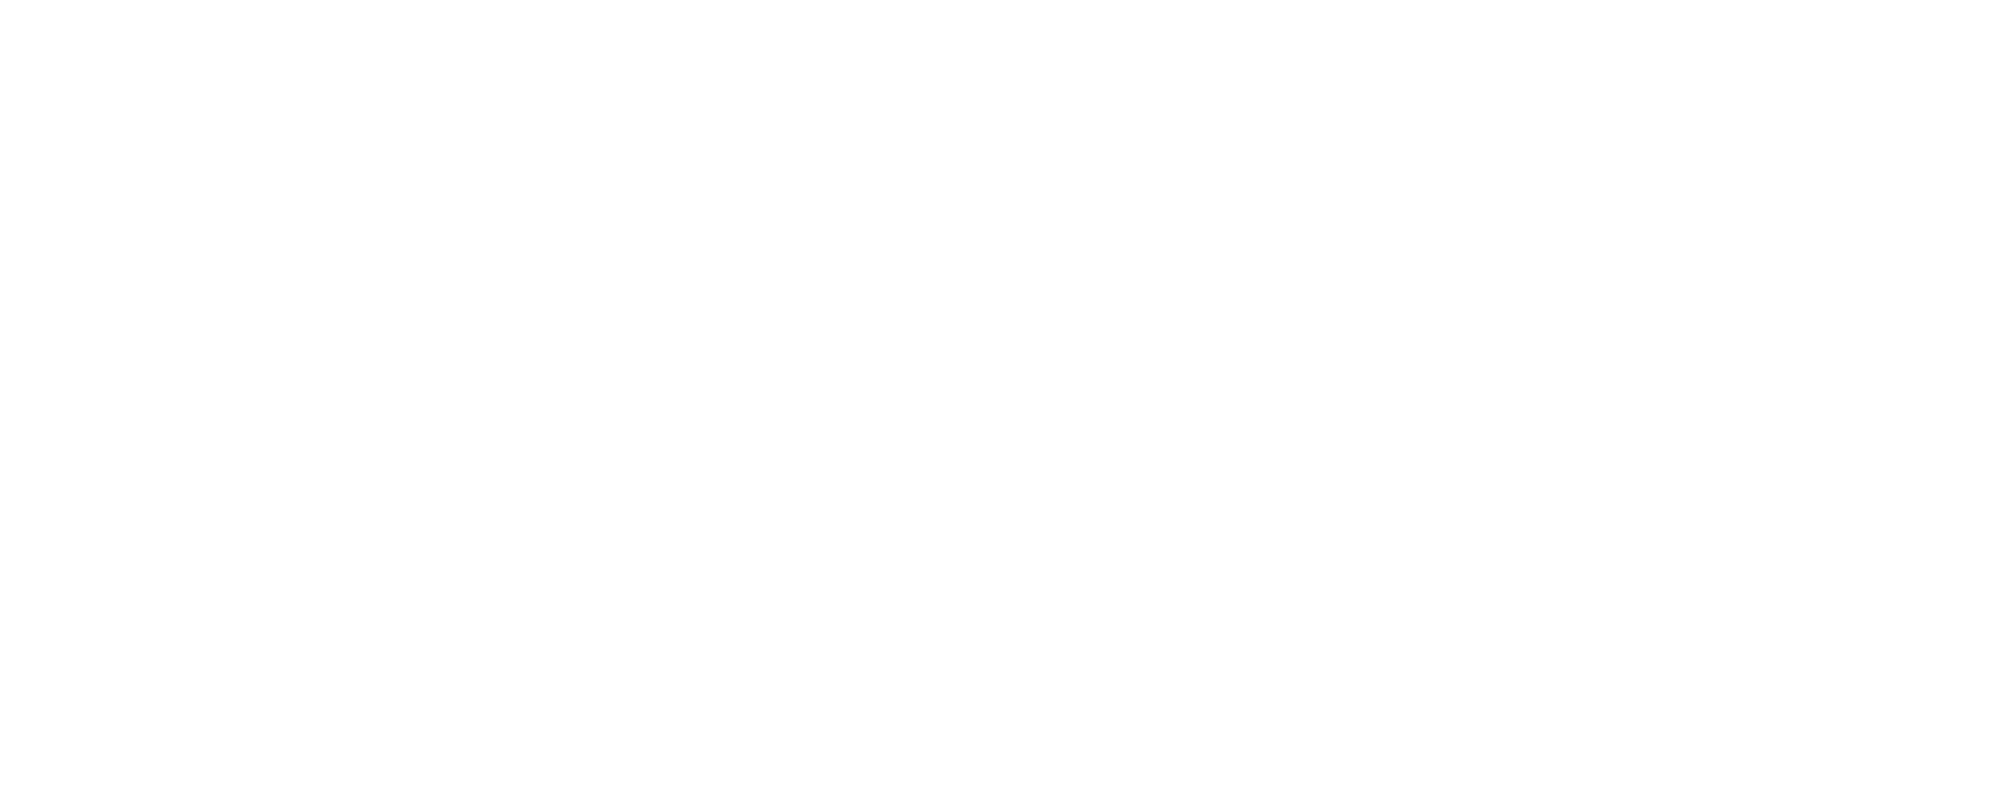 OVATION TV CELEBRATES ‘VIRTUAL’ ARTS ADVOCACY DAY, OFFERING FREE ARTS PROGRAMMING AVAILABLE TO ALL ON OVATIONTV.COM AND THE OVATION NOW APP